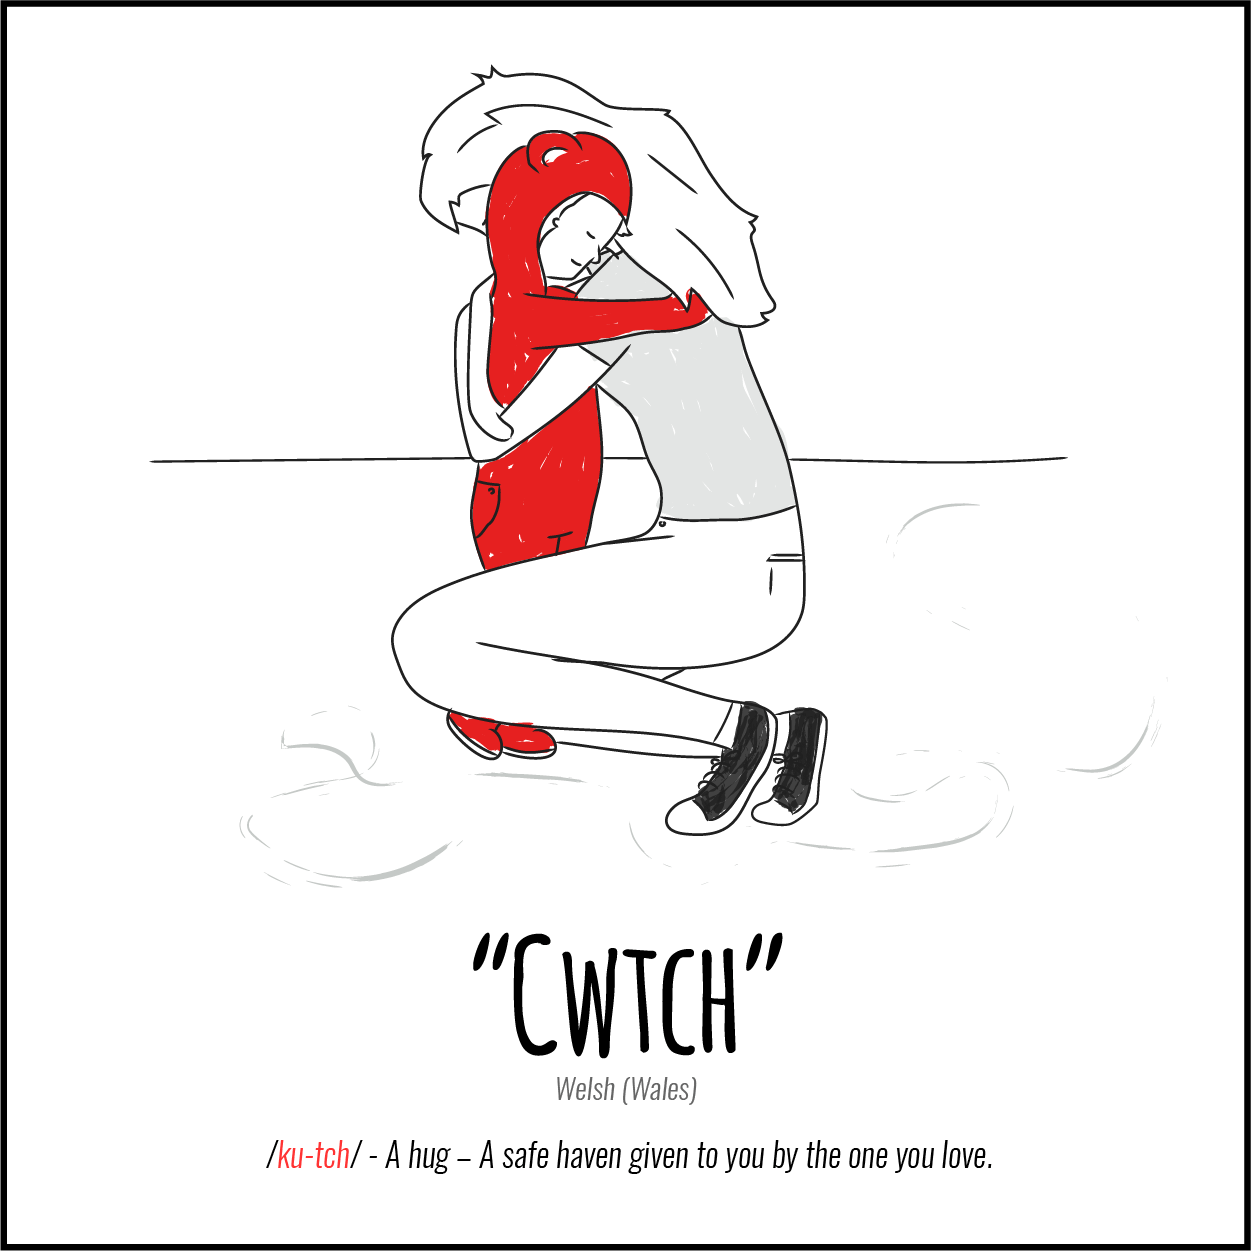 Illustration: Untranslatable Words about love, Cwtch (Welsh, Wales) A hug--as safe haven given to you by the one you love